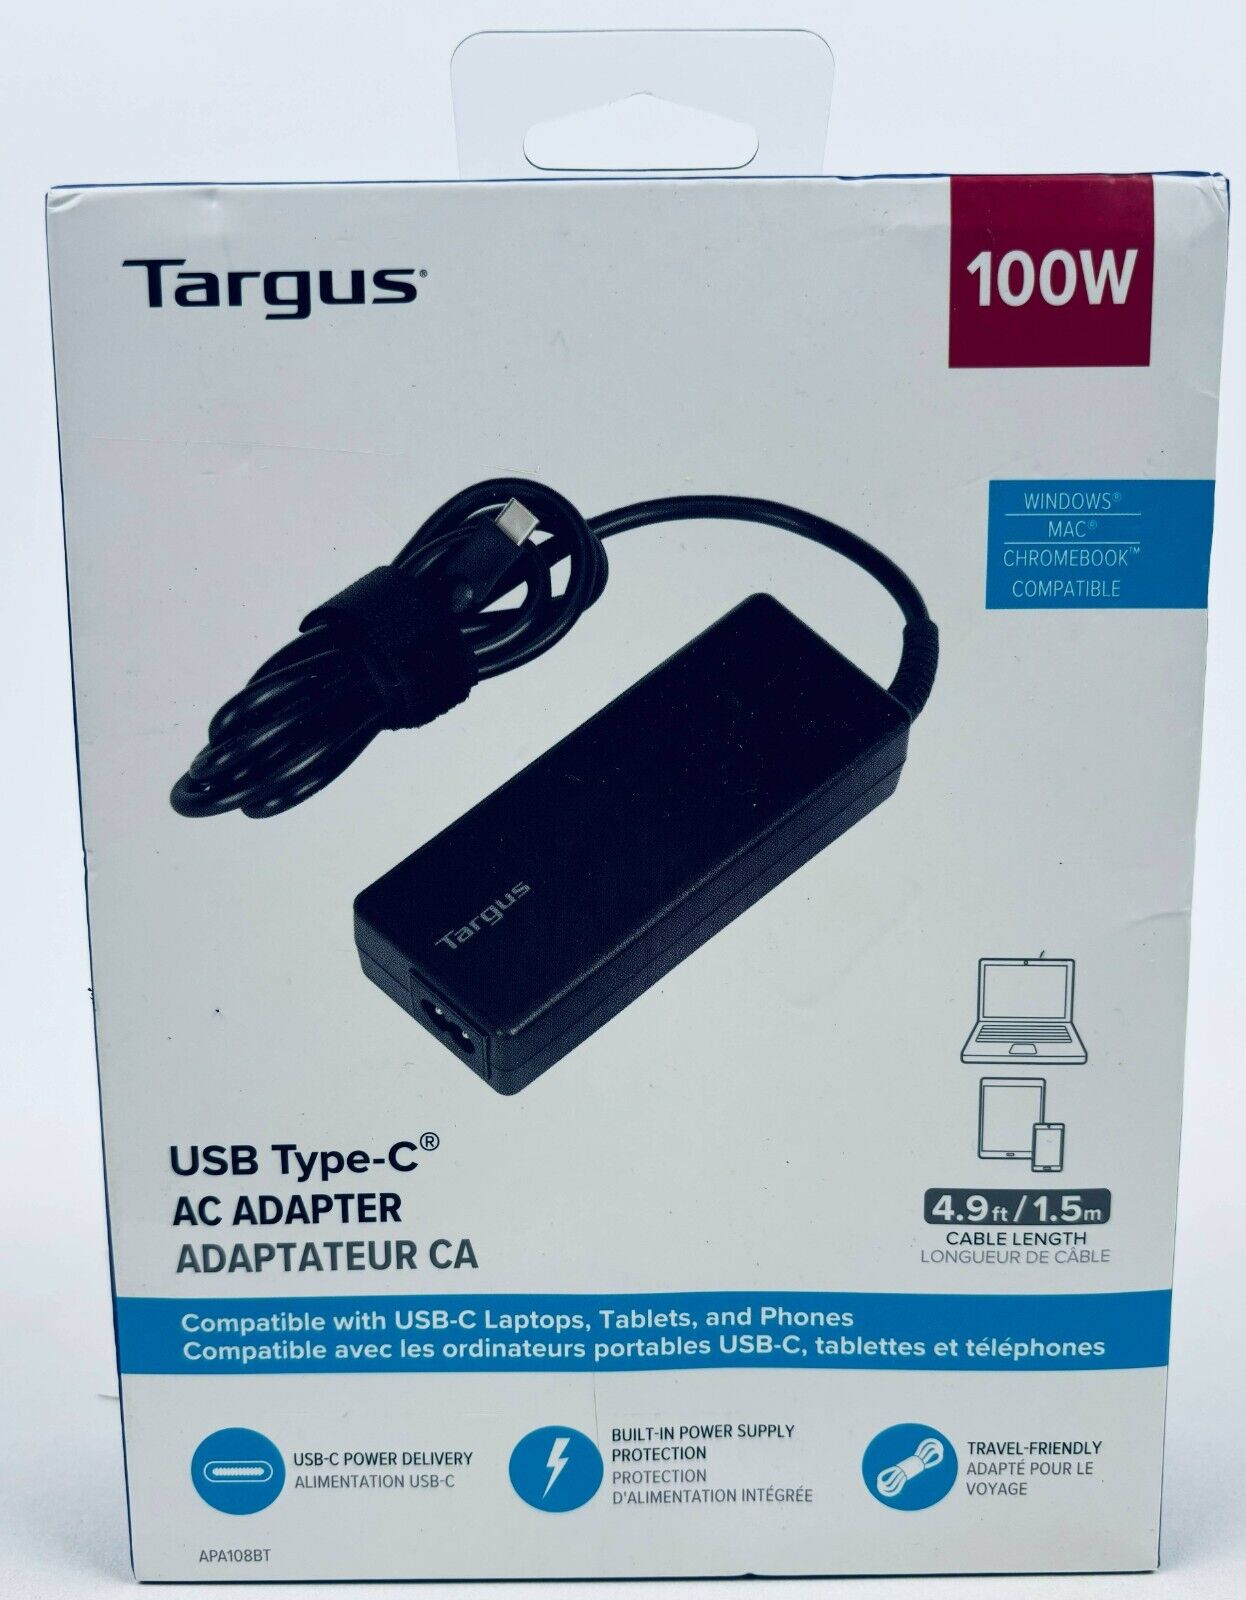 Targus Usb Type-C AC Adapter - 1.5 m Cable Length - 100W